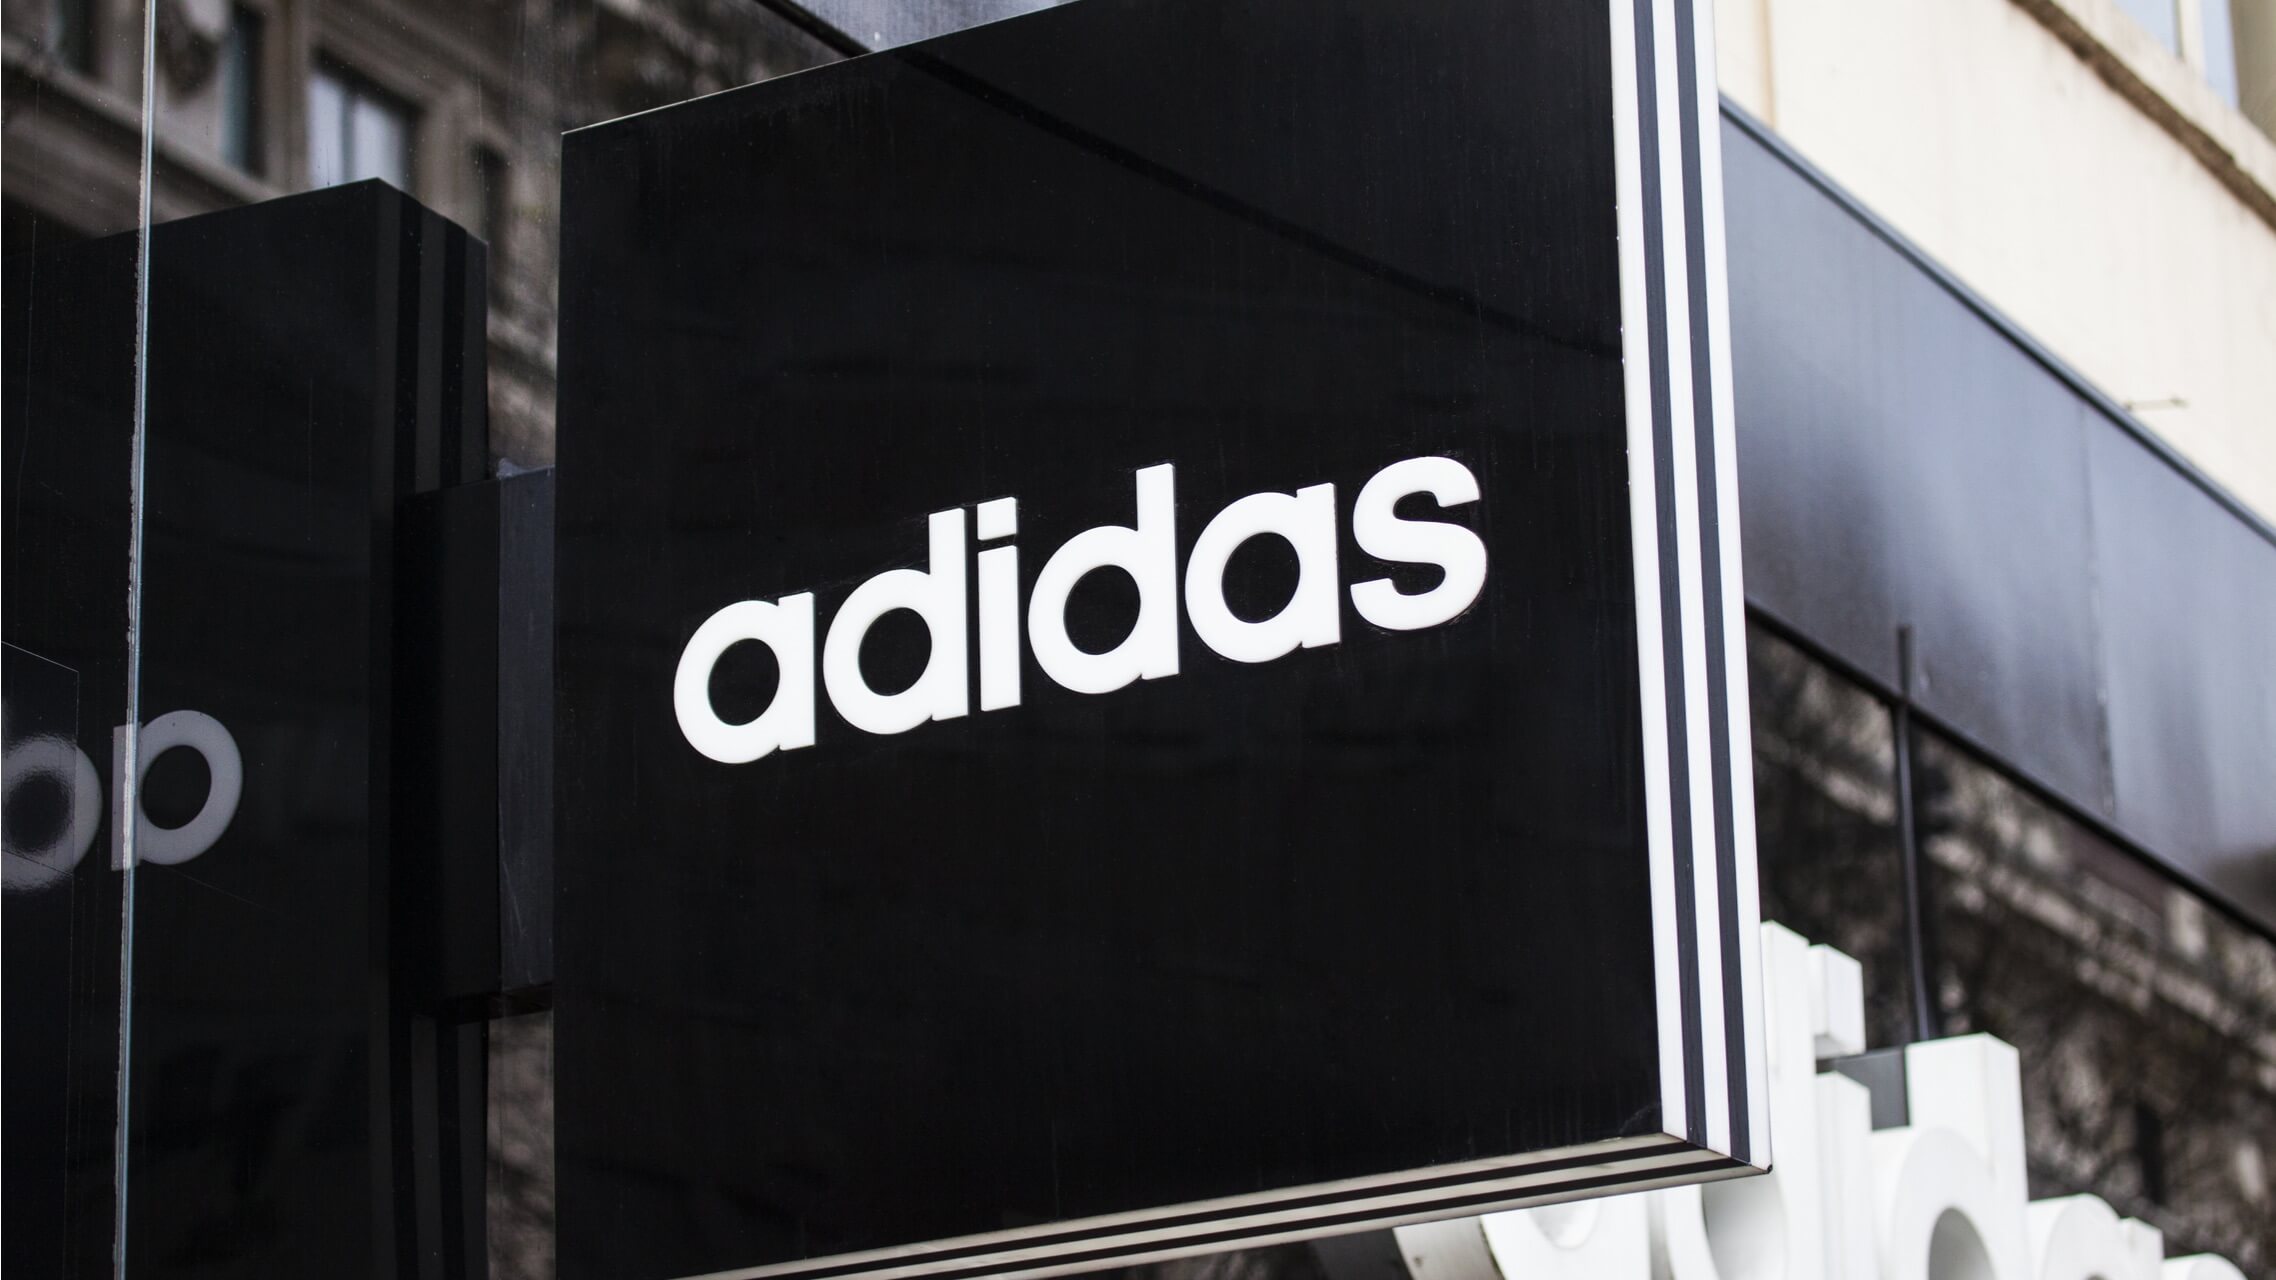 How ethical is Adidas AG?